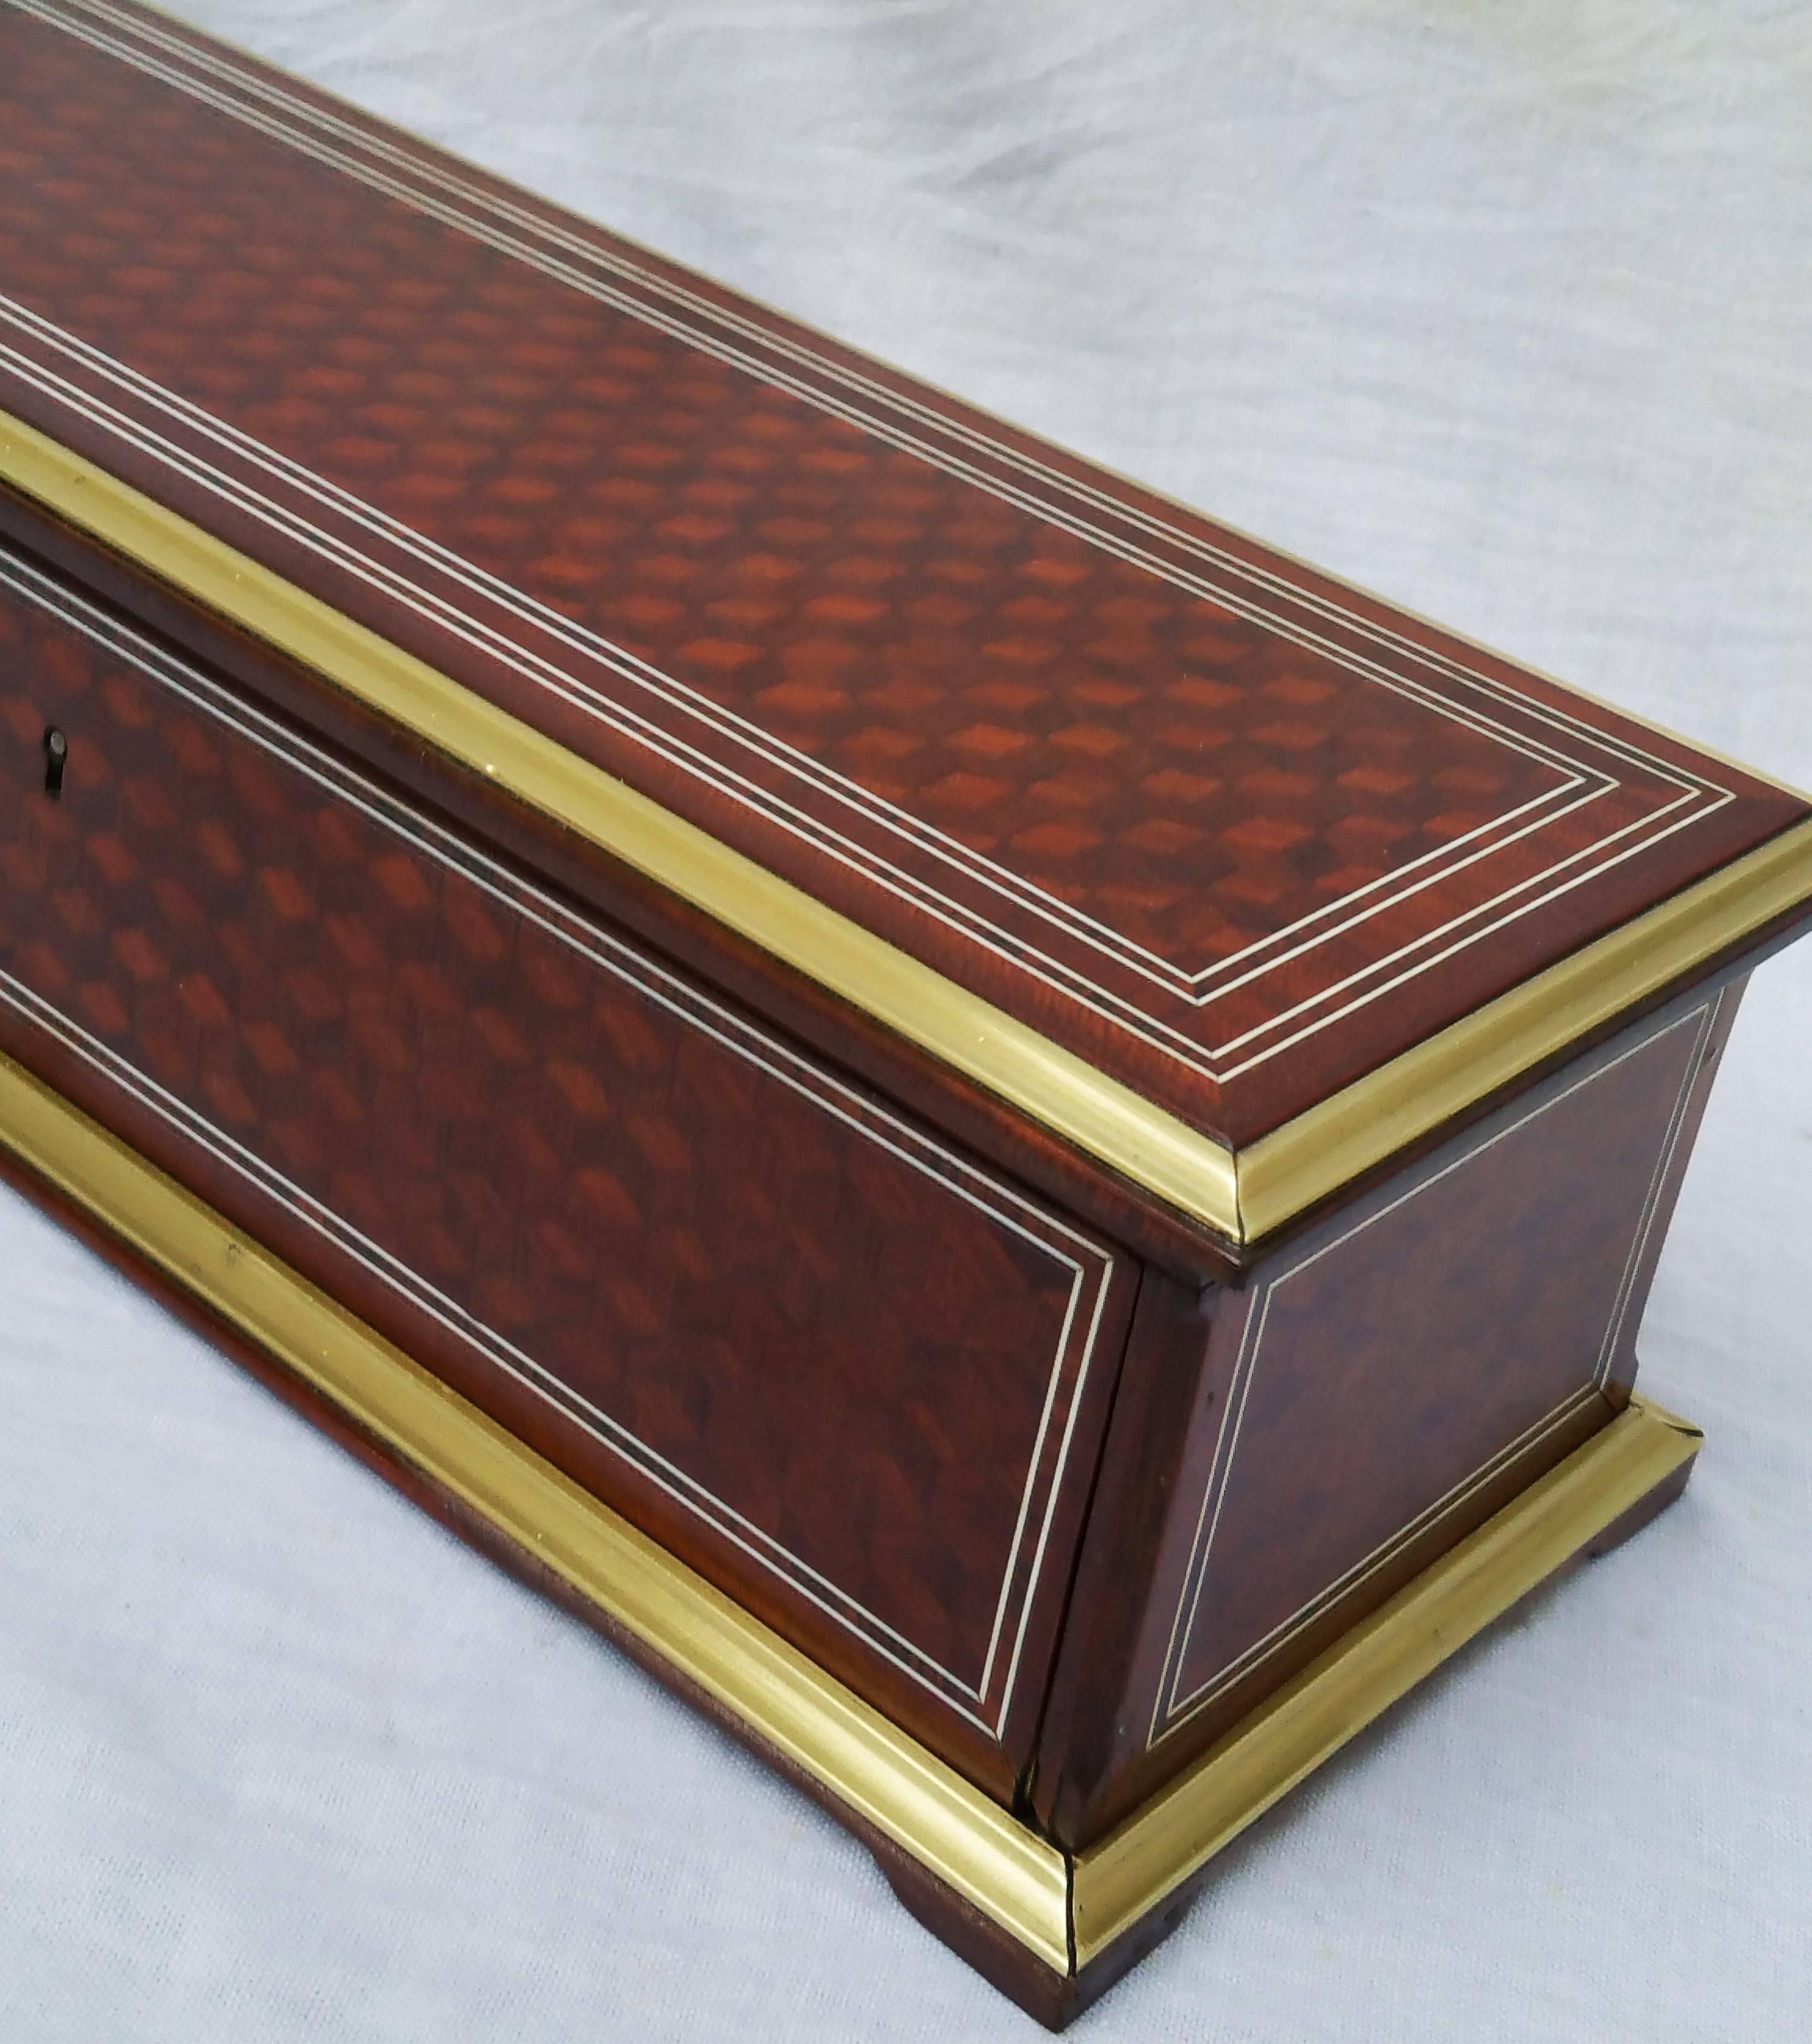 Big size elegant jewelry decorative box that used to be a gloves box. All sides are beautifully checkerboard style wood veneered decorated with precious woodq and mahogany, brass, bones and polished bronze and horn marquetry.
The inside part is